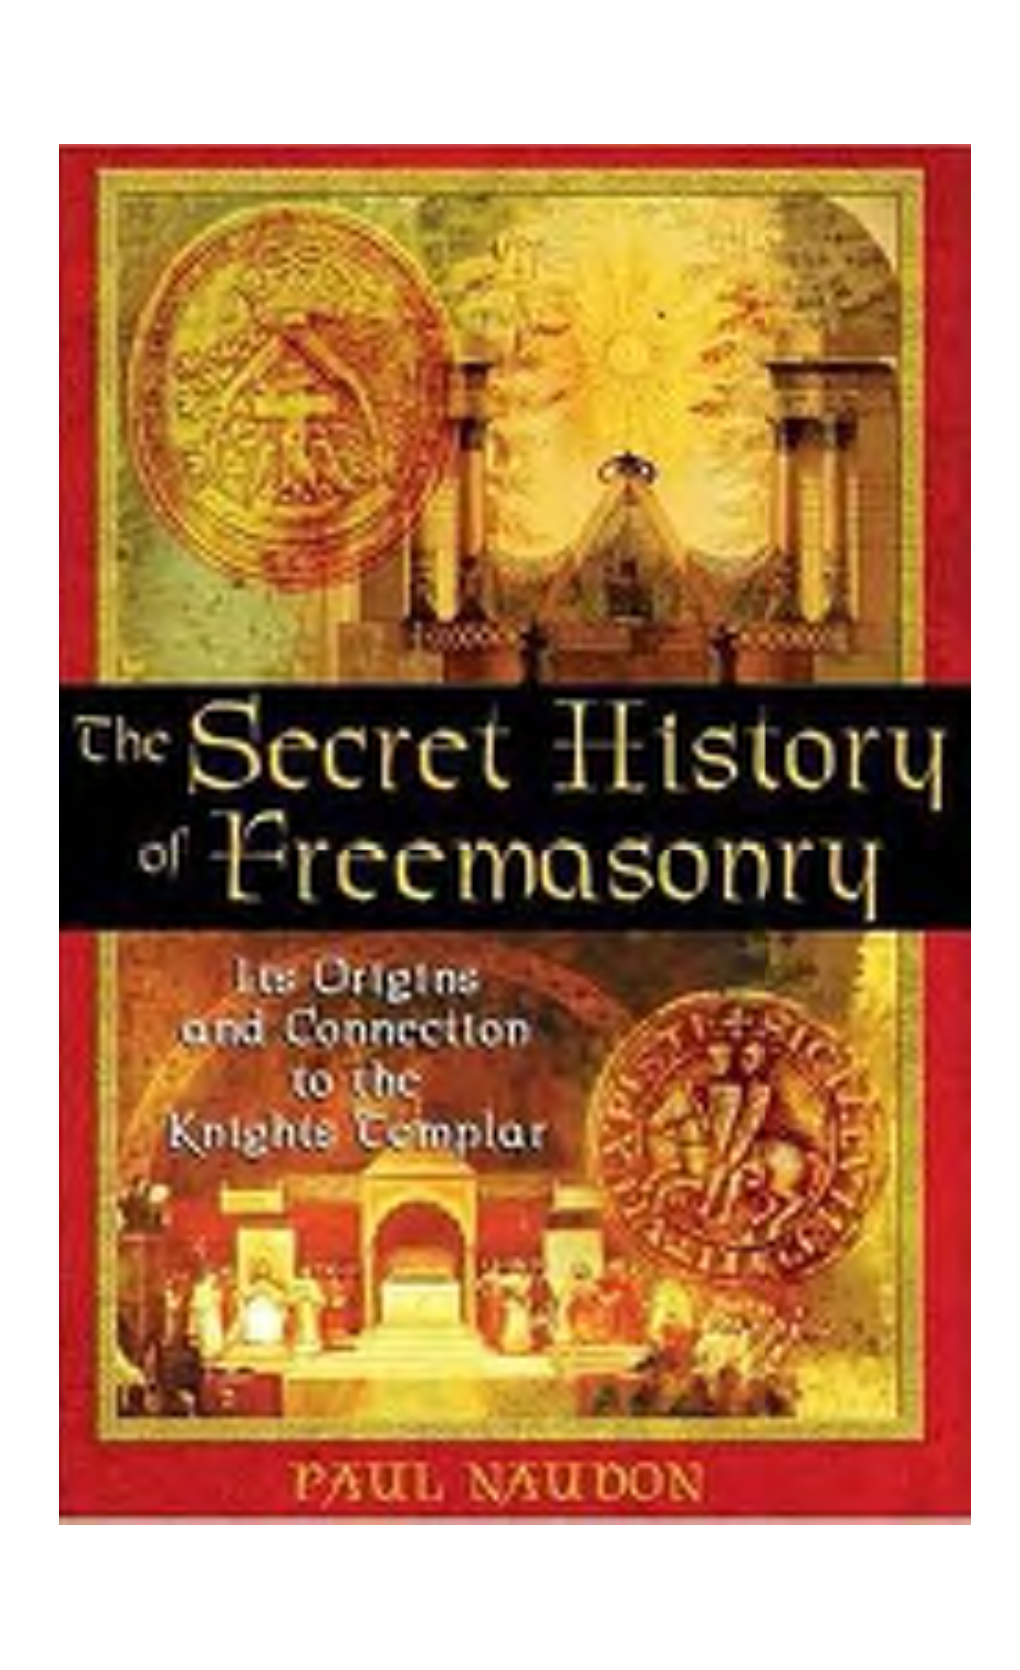 The Origins of Freemasonry from Ancient Times to the Middle Ages